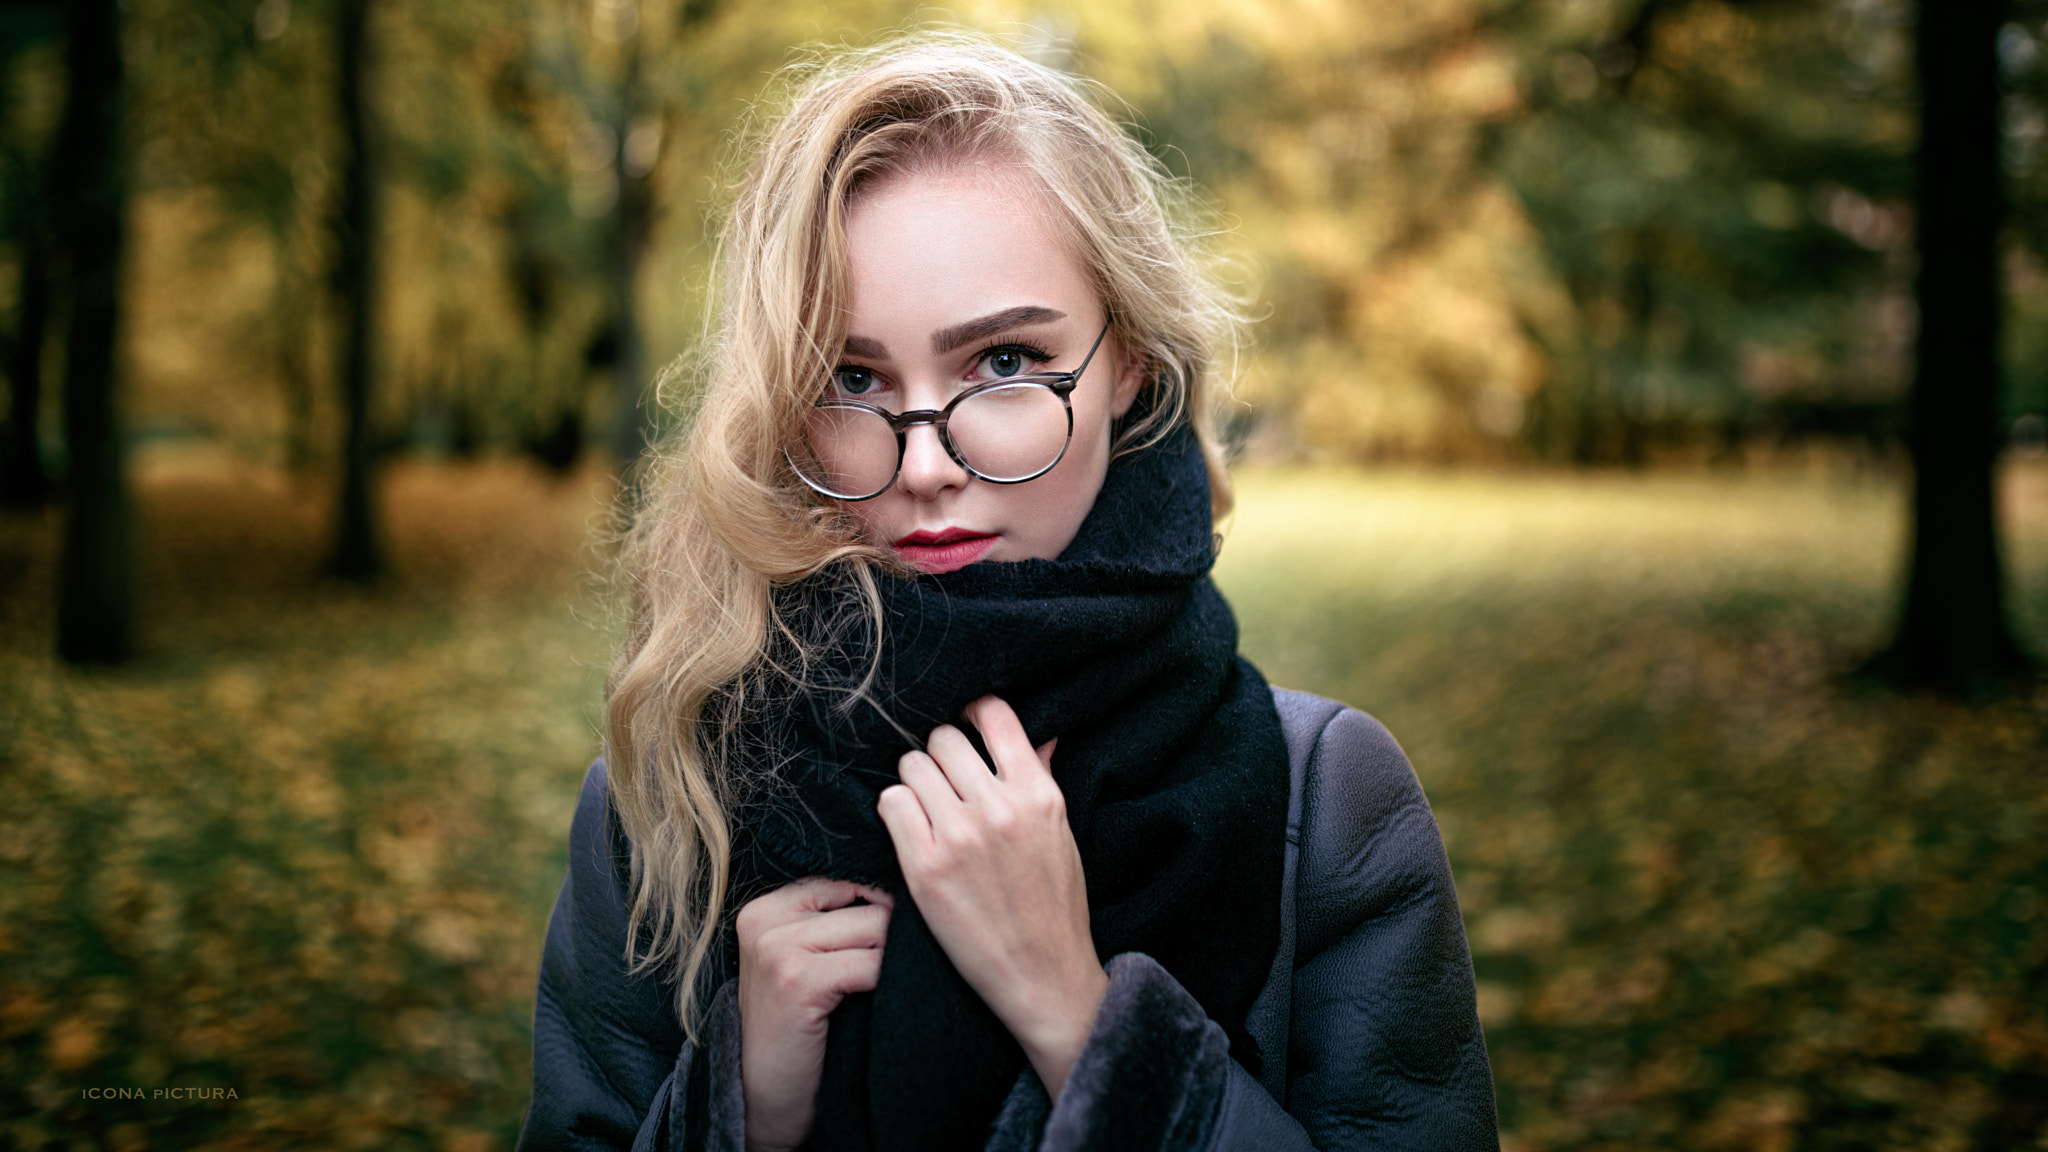 Women Blonde Scarf Women With Glasses Depth Of Field Trees Women Outdoors Portrait Icona Pictura Ser 2048x1152